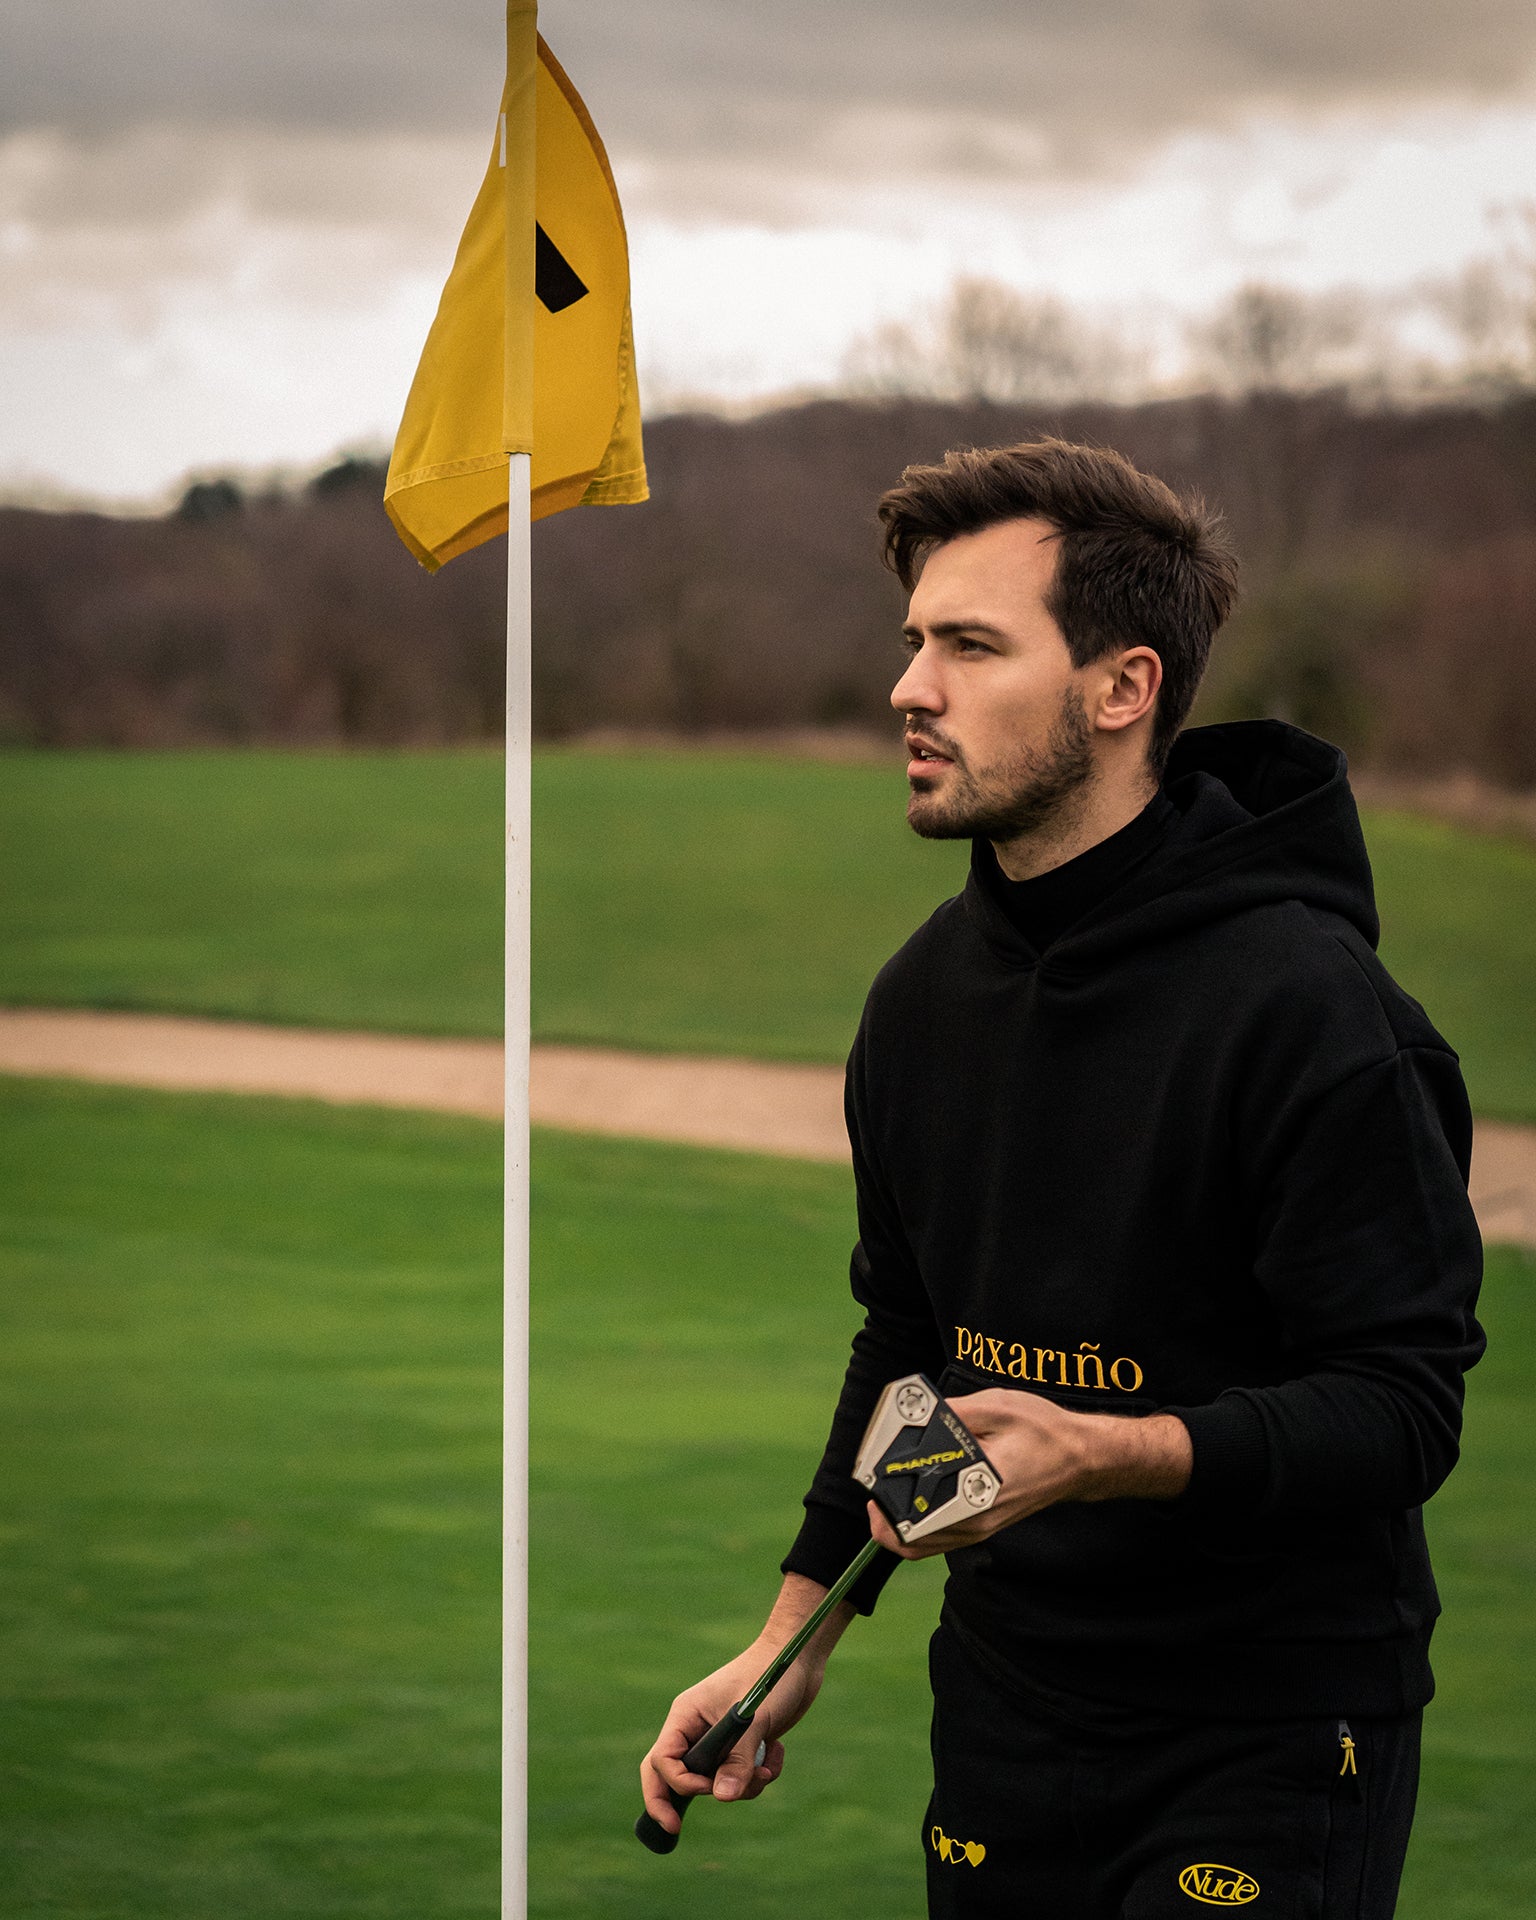 Co-Founder Cedric wearing the "revolución" Hoodie on the golf course.